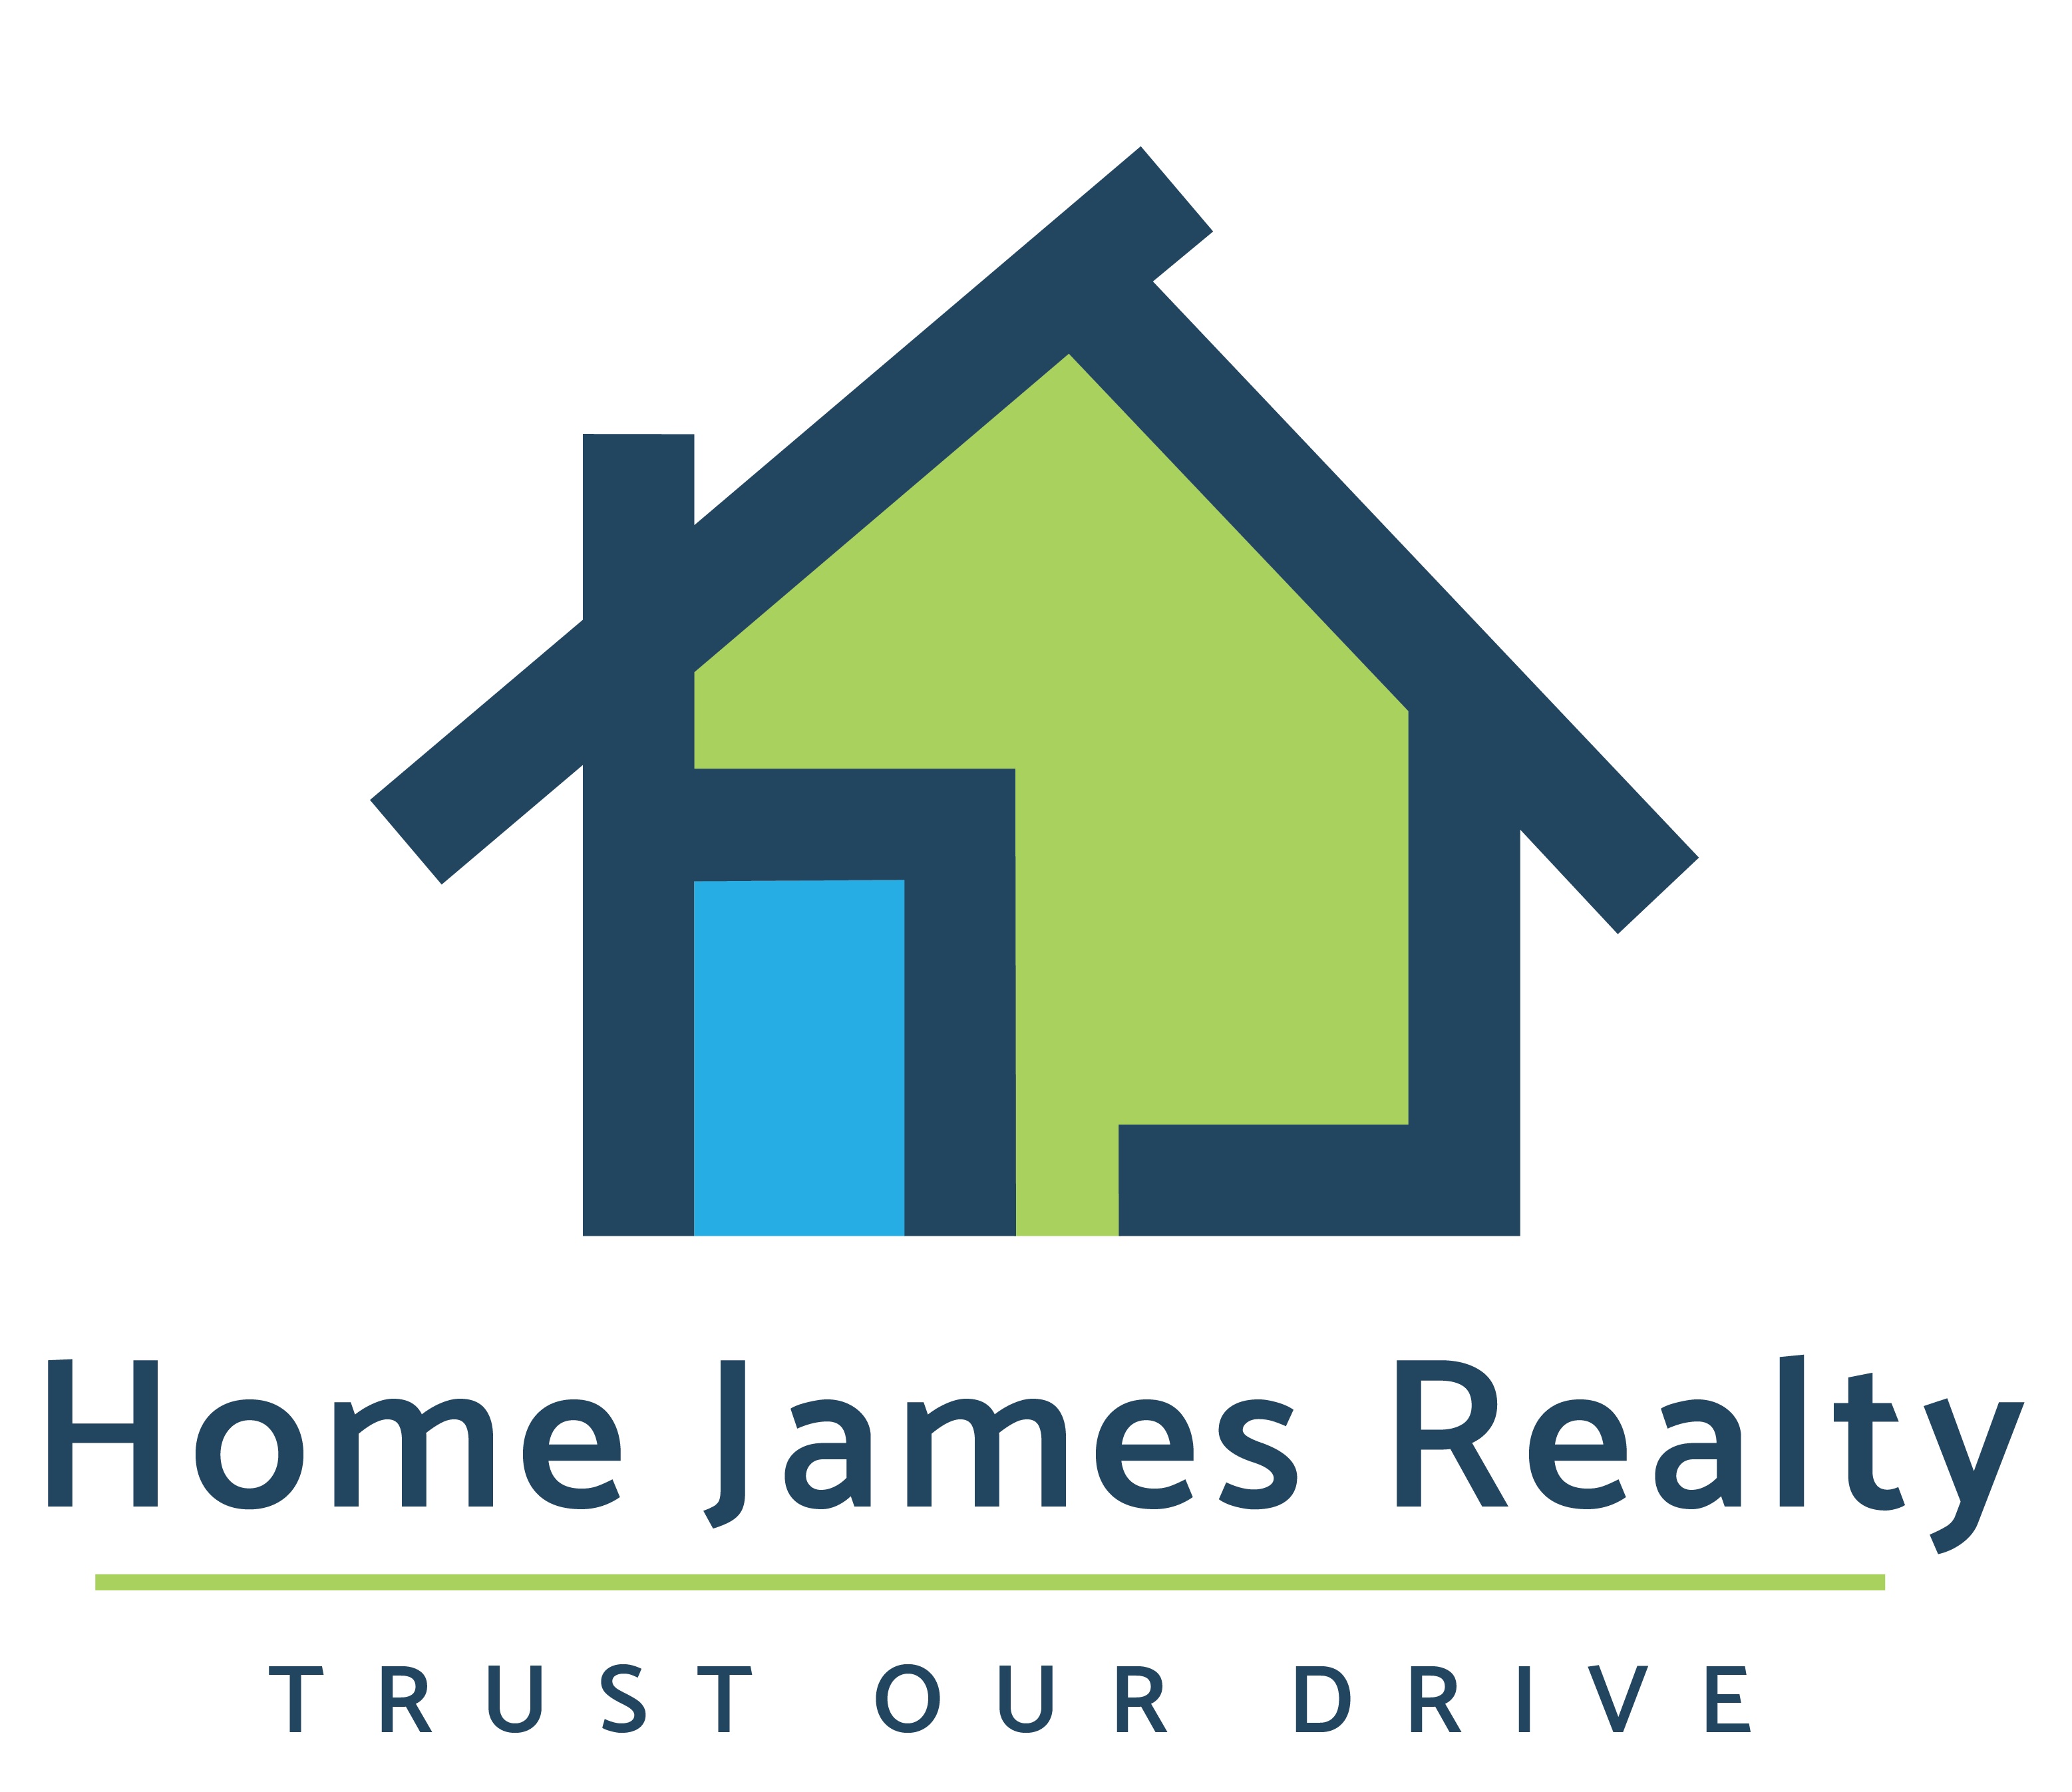 Home James Realty